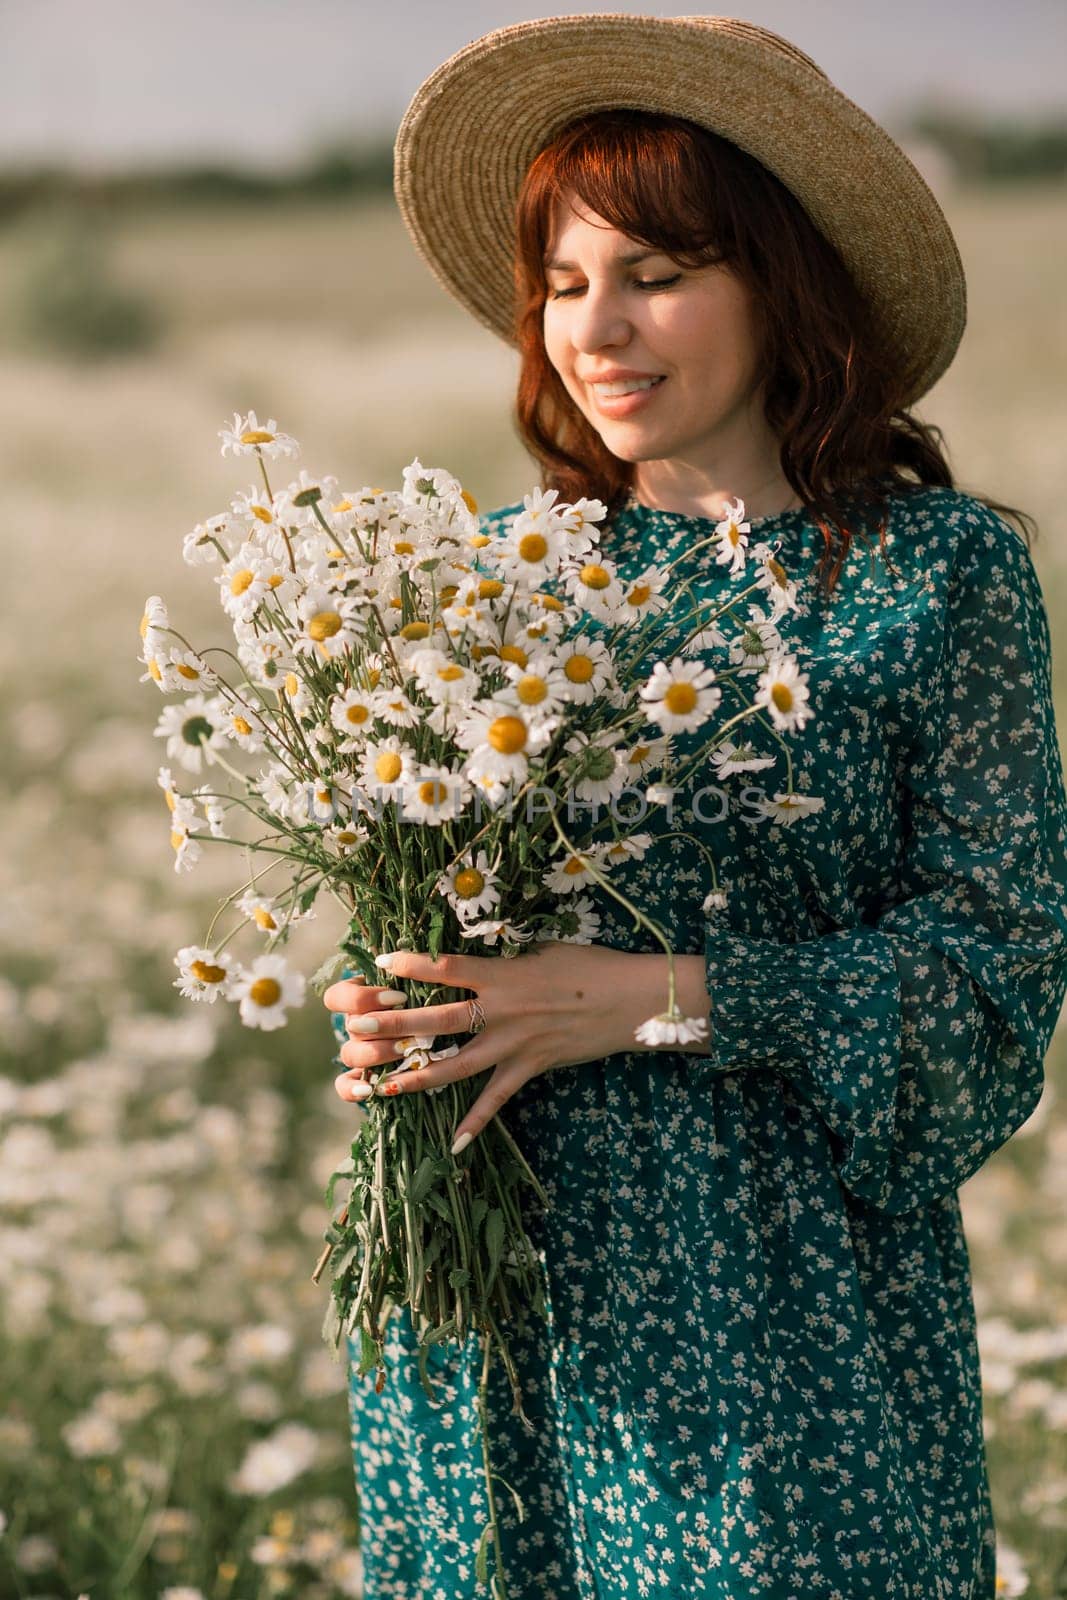 Happy woman in a field of daisies with a wreath of wildflowers on her head. woman in a green dress in a field of white flowers. Charming woman with a bouquet of daisies, tender summer photo.